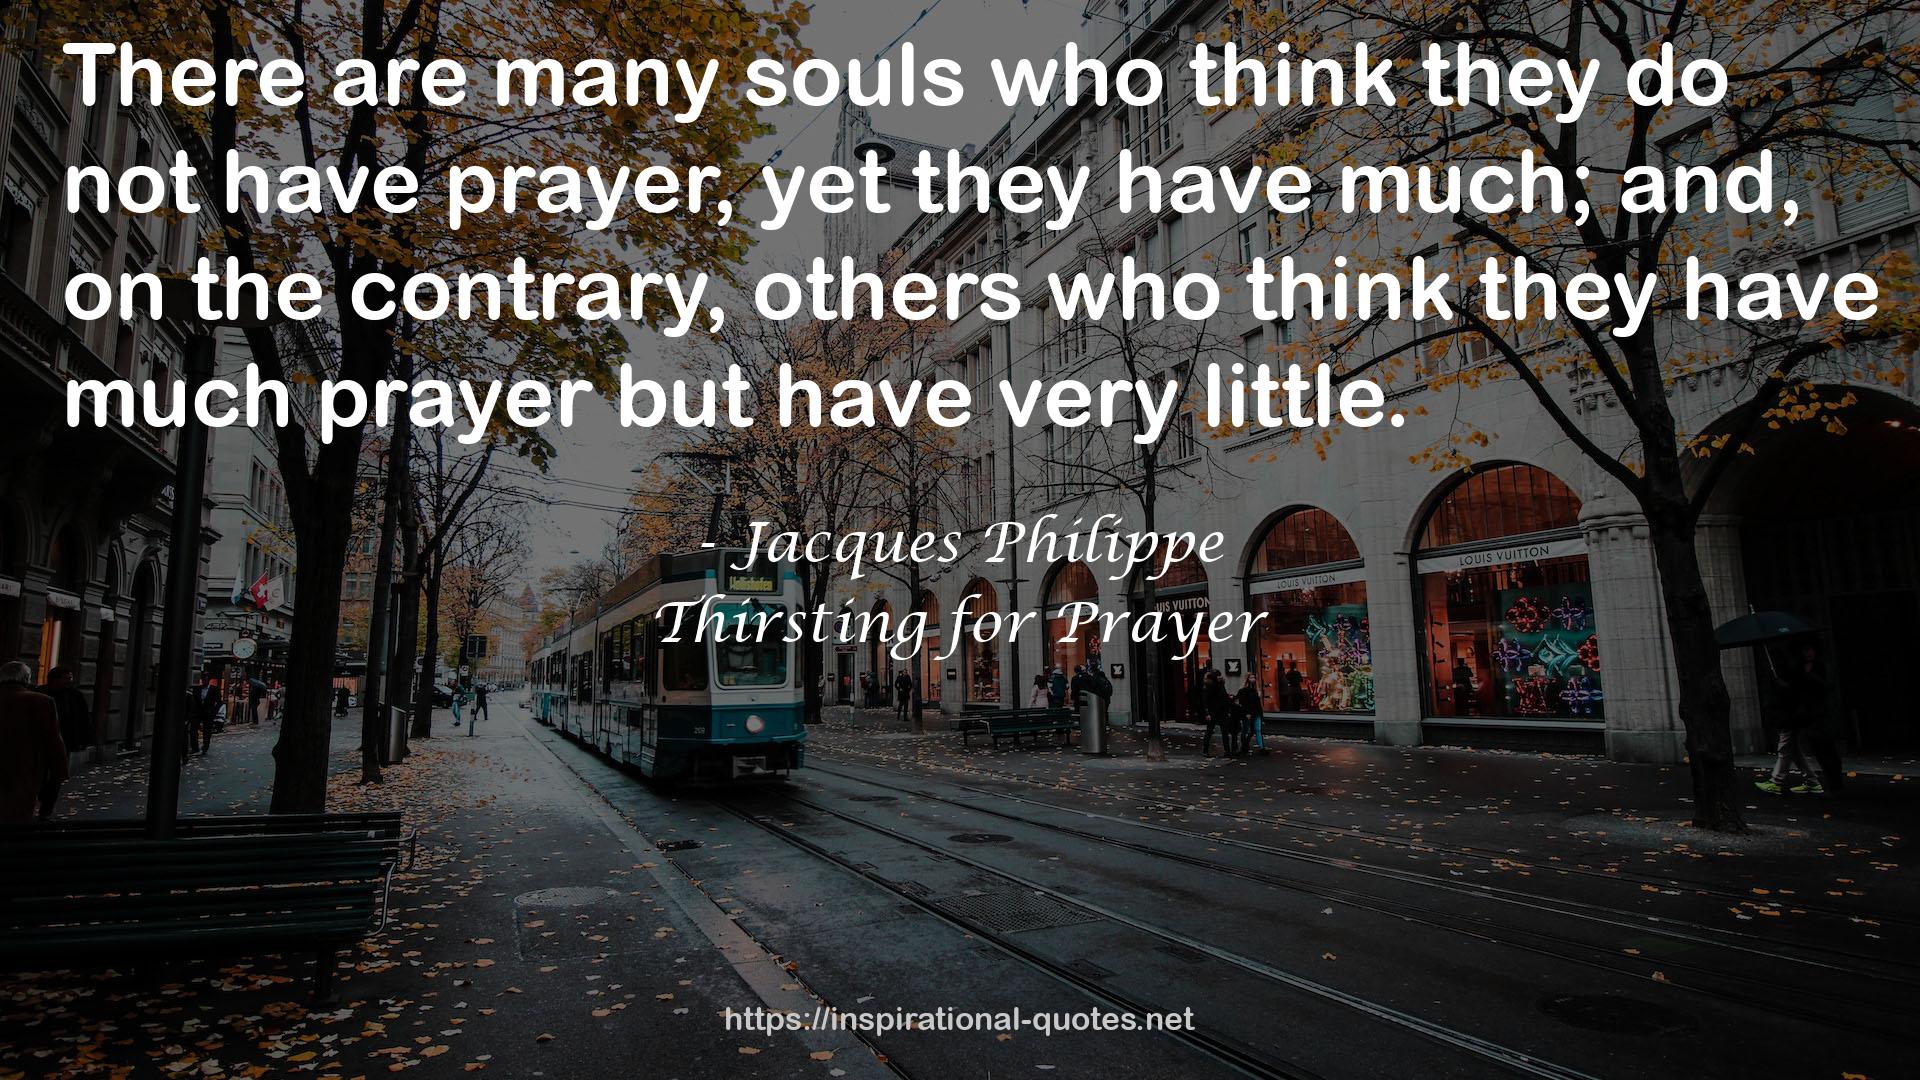 Thirsting for Prayer QUOTES